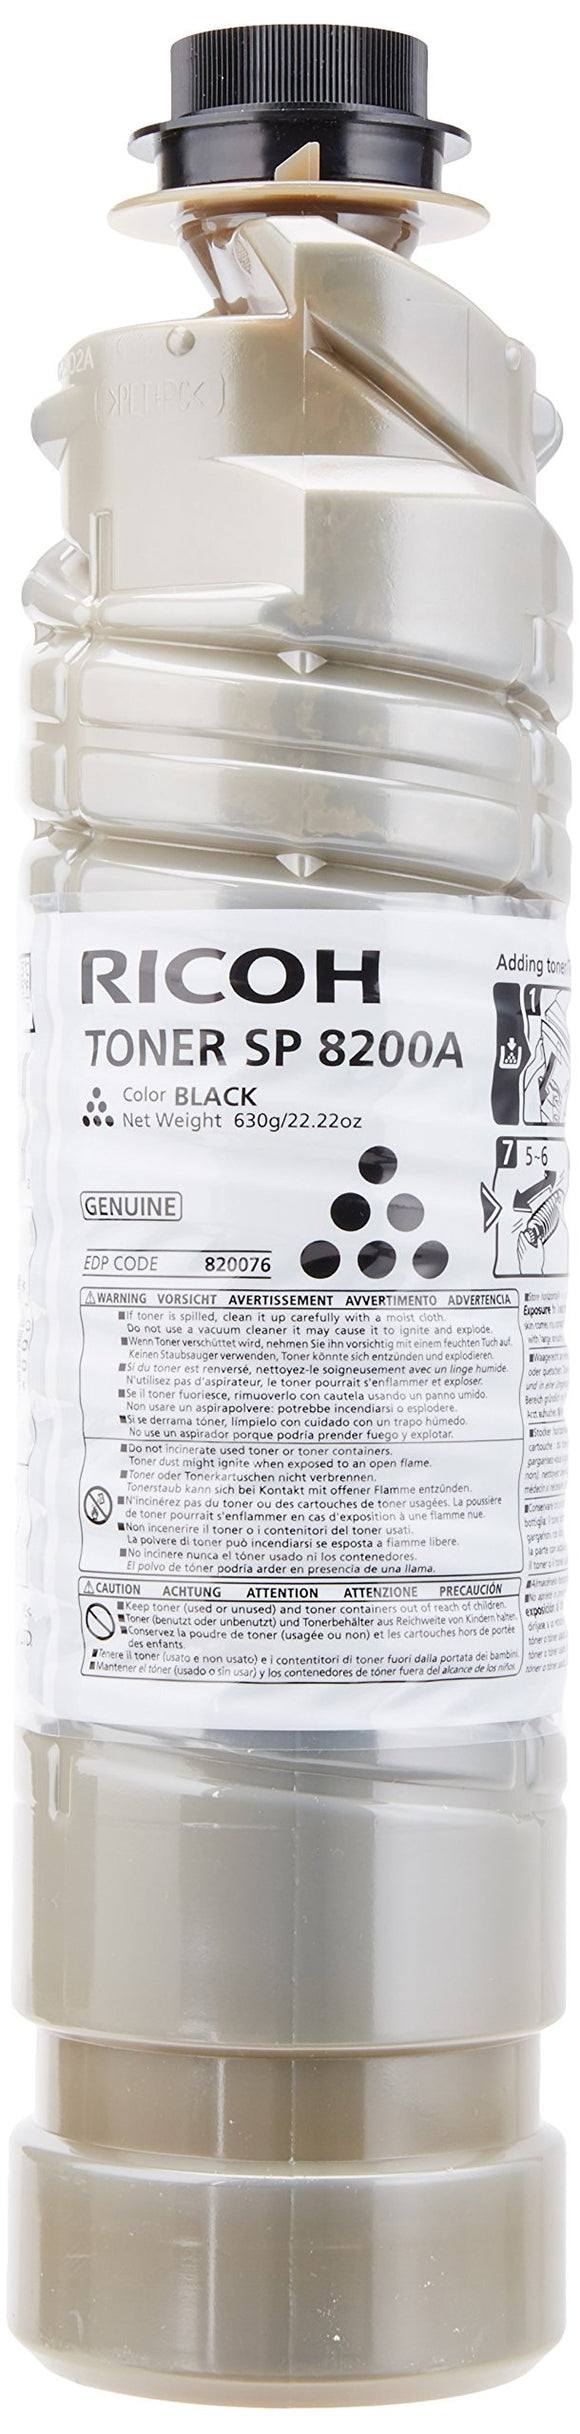 Ricoh Toner for Use in Lp150dn Sp8200dn Mlp150dn Estimated Print Yield 36,000 Pa